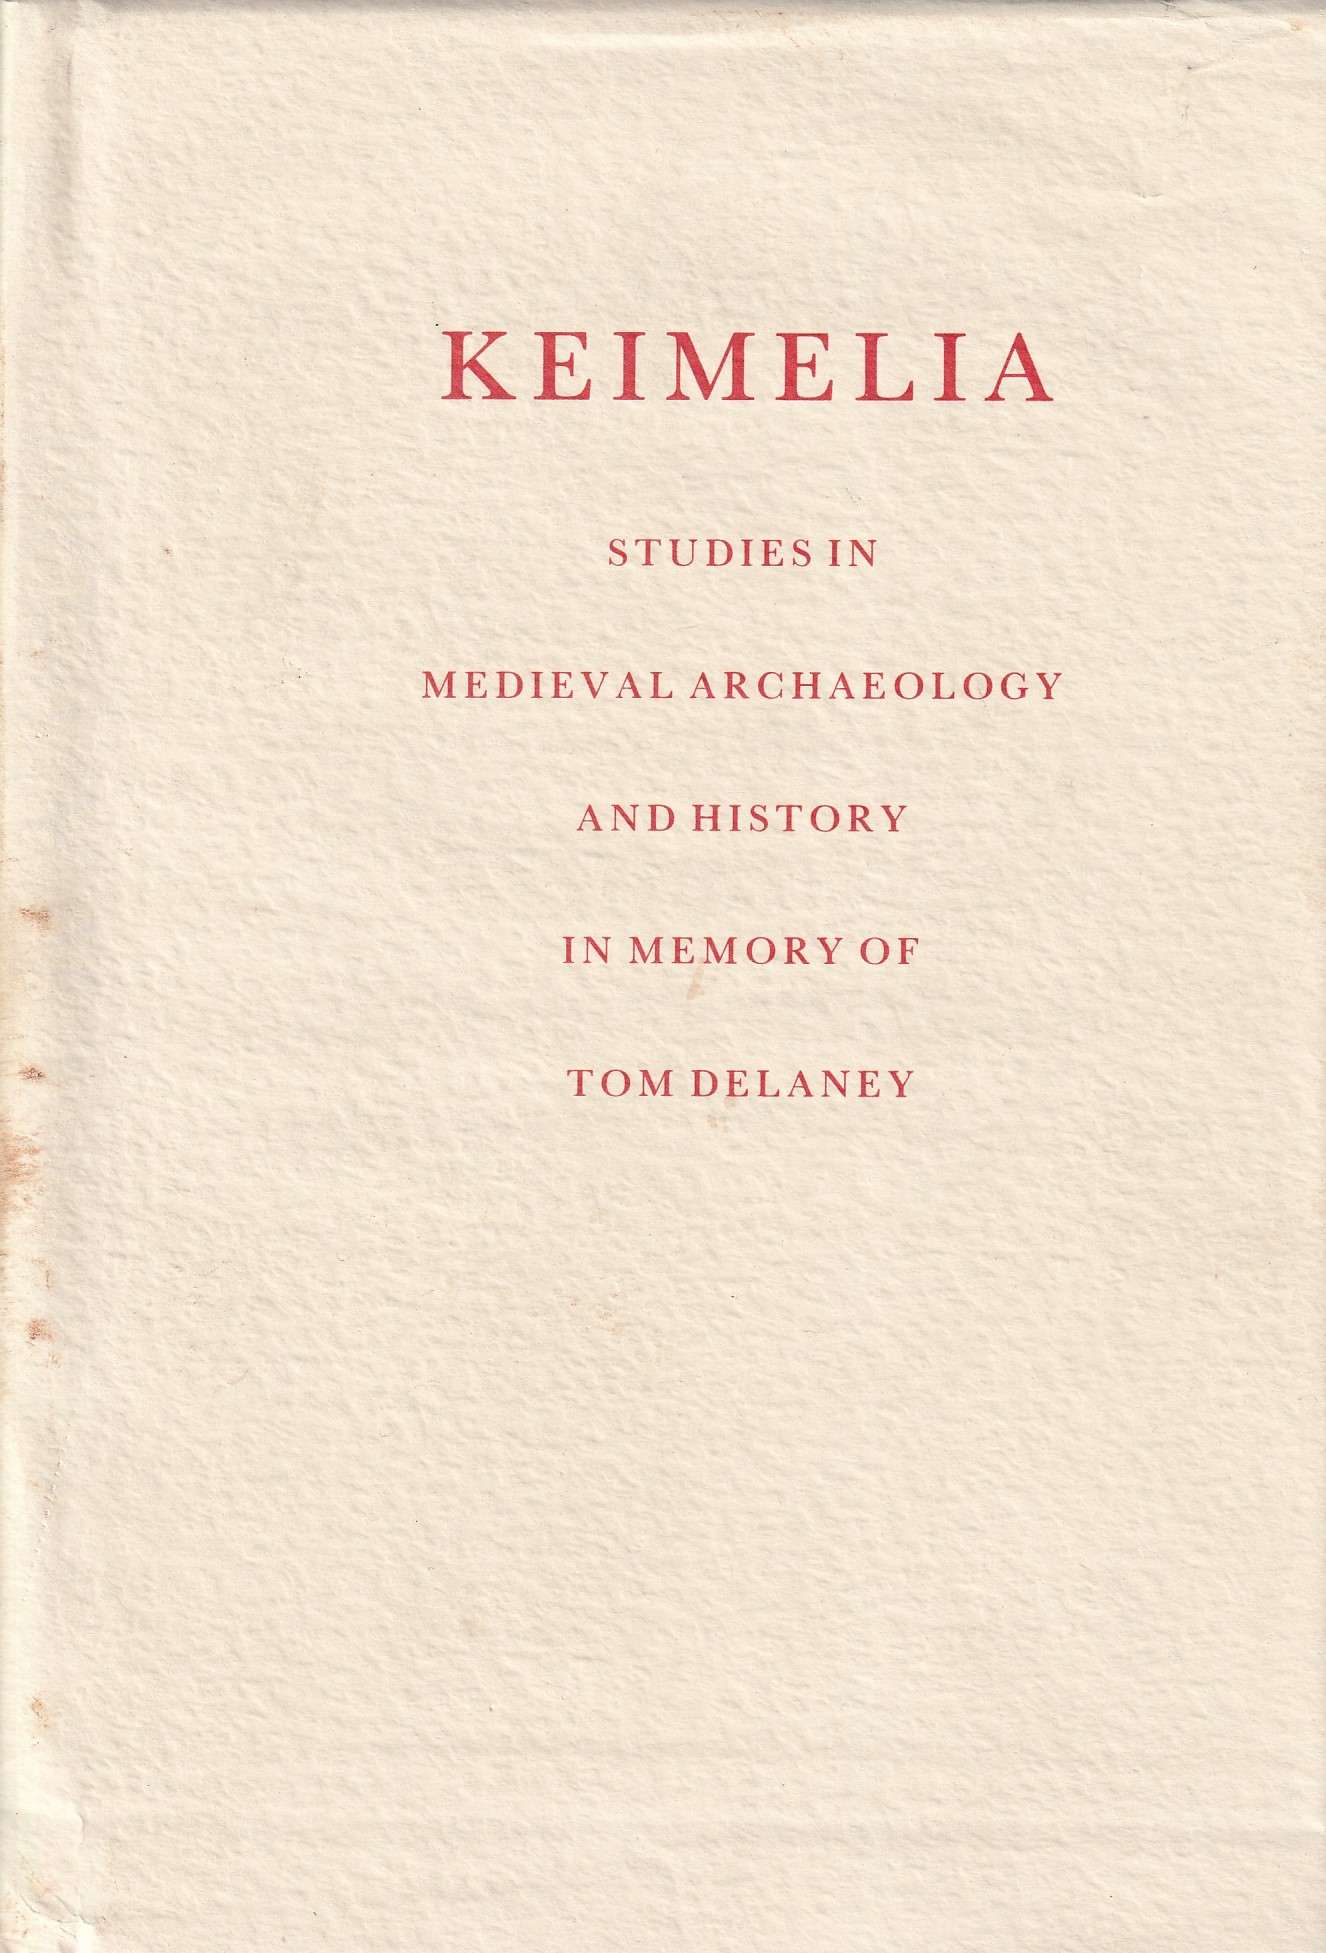 Keimelia: Studies in Medieval Archaeology and History in Memory of Tom Delaney by Gearóid Mac Niocaill & Patrick F. Wallace (eds.)